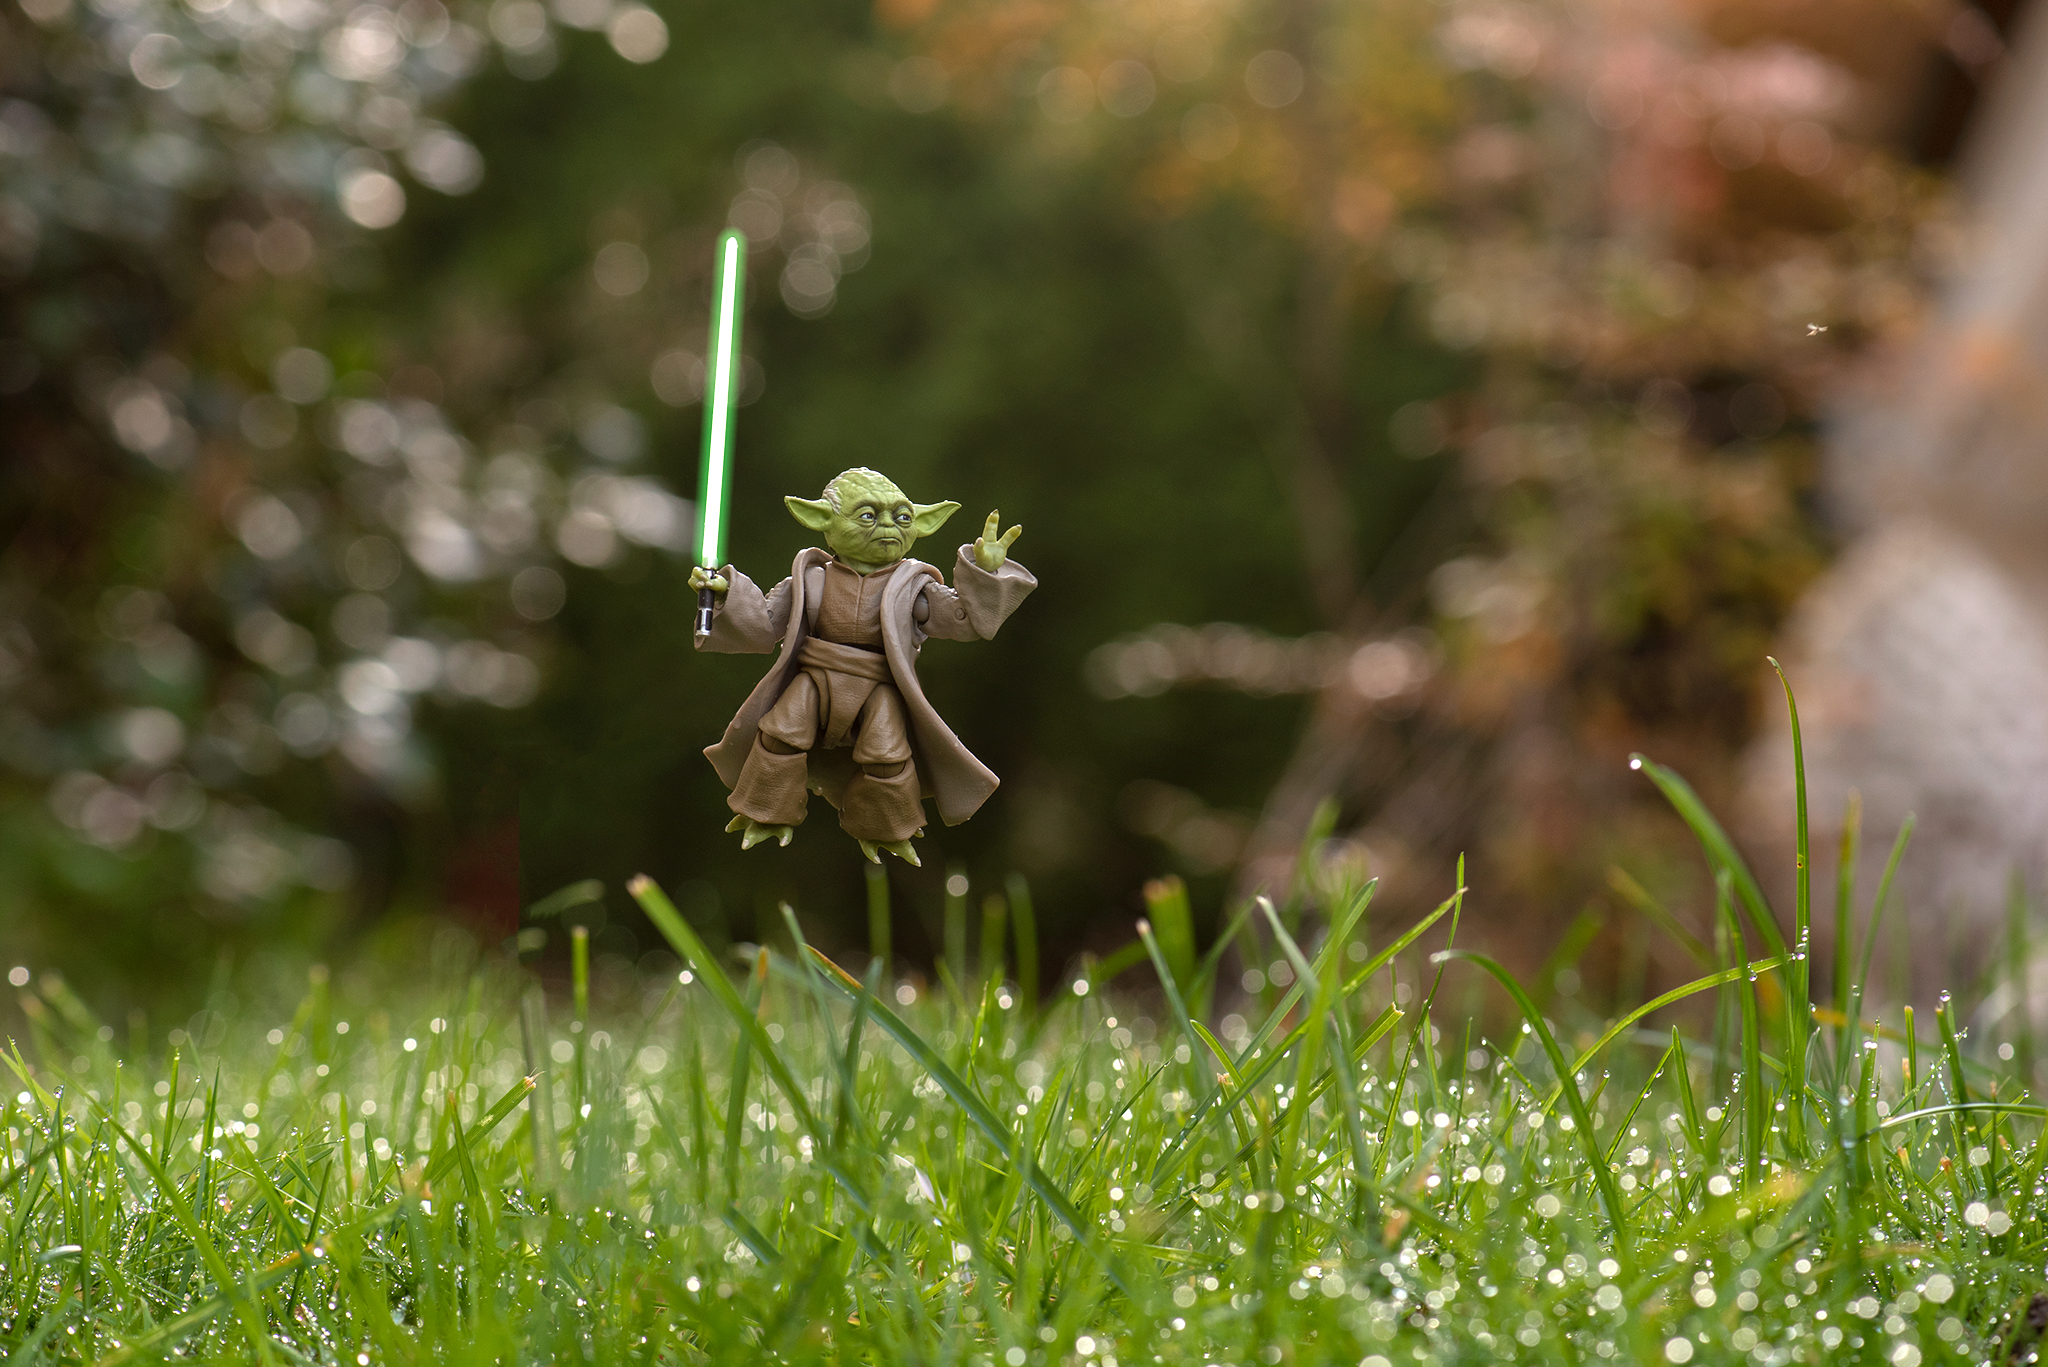 SH Figuarts Yoda Photos And Review